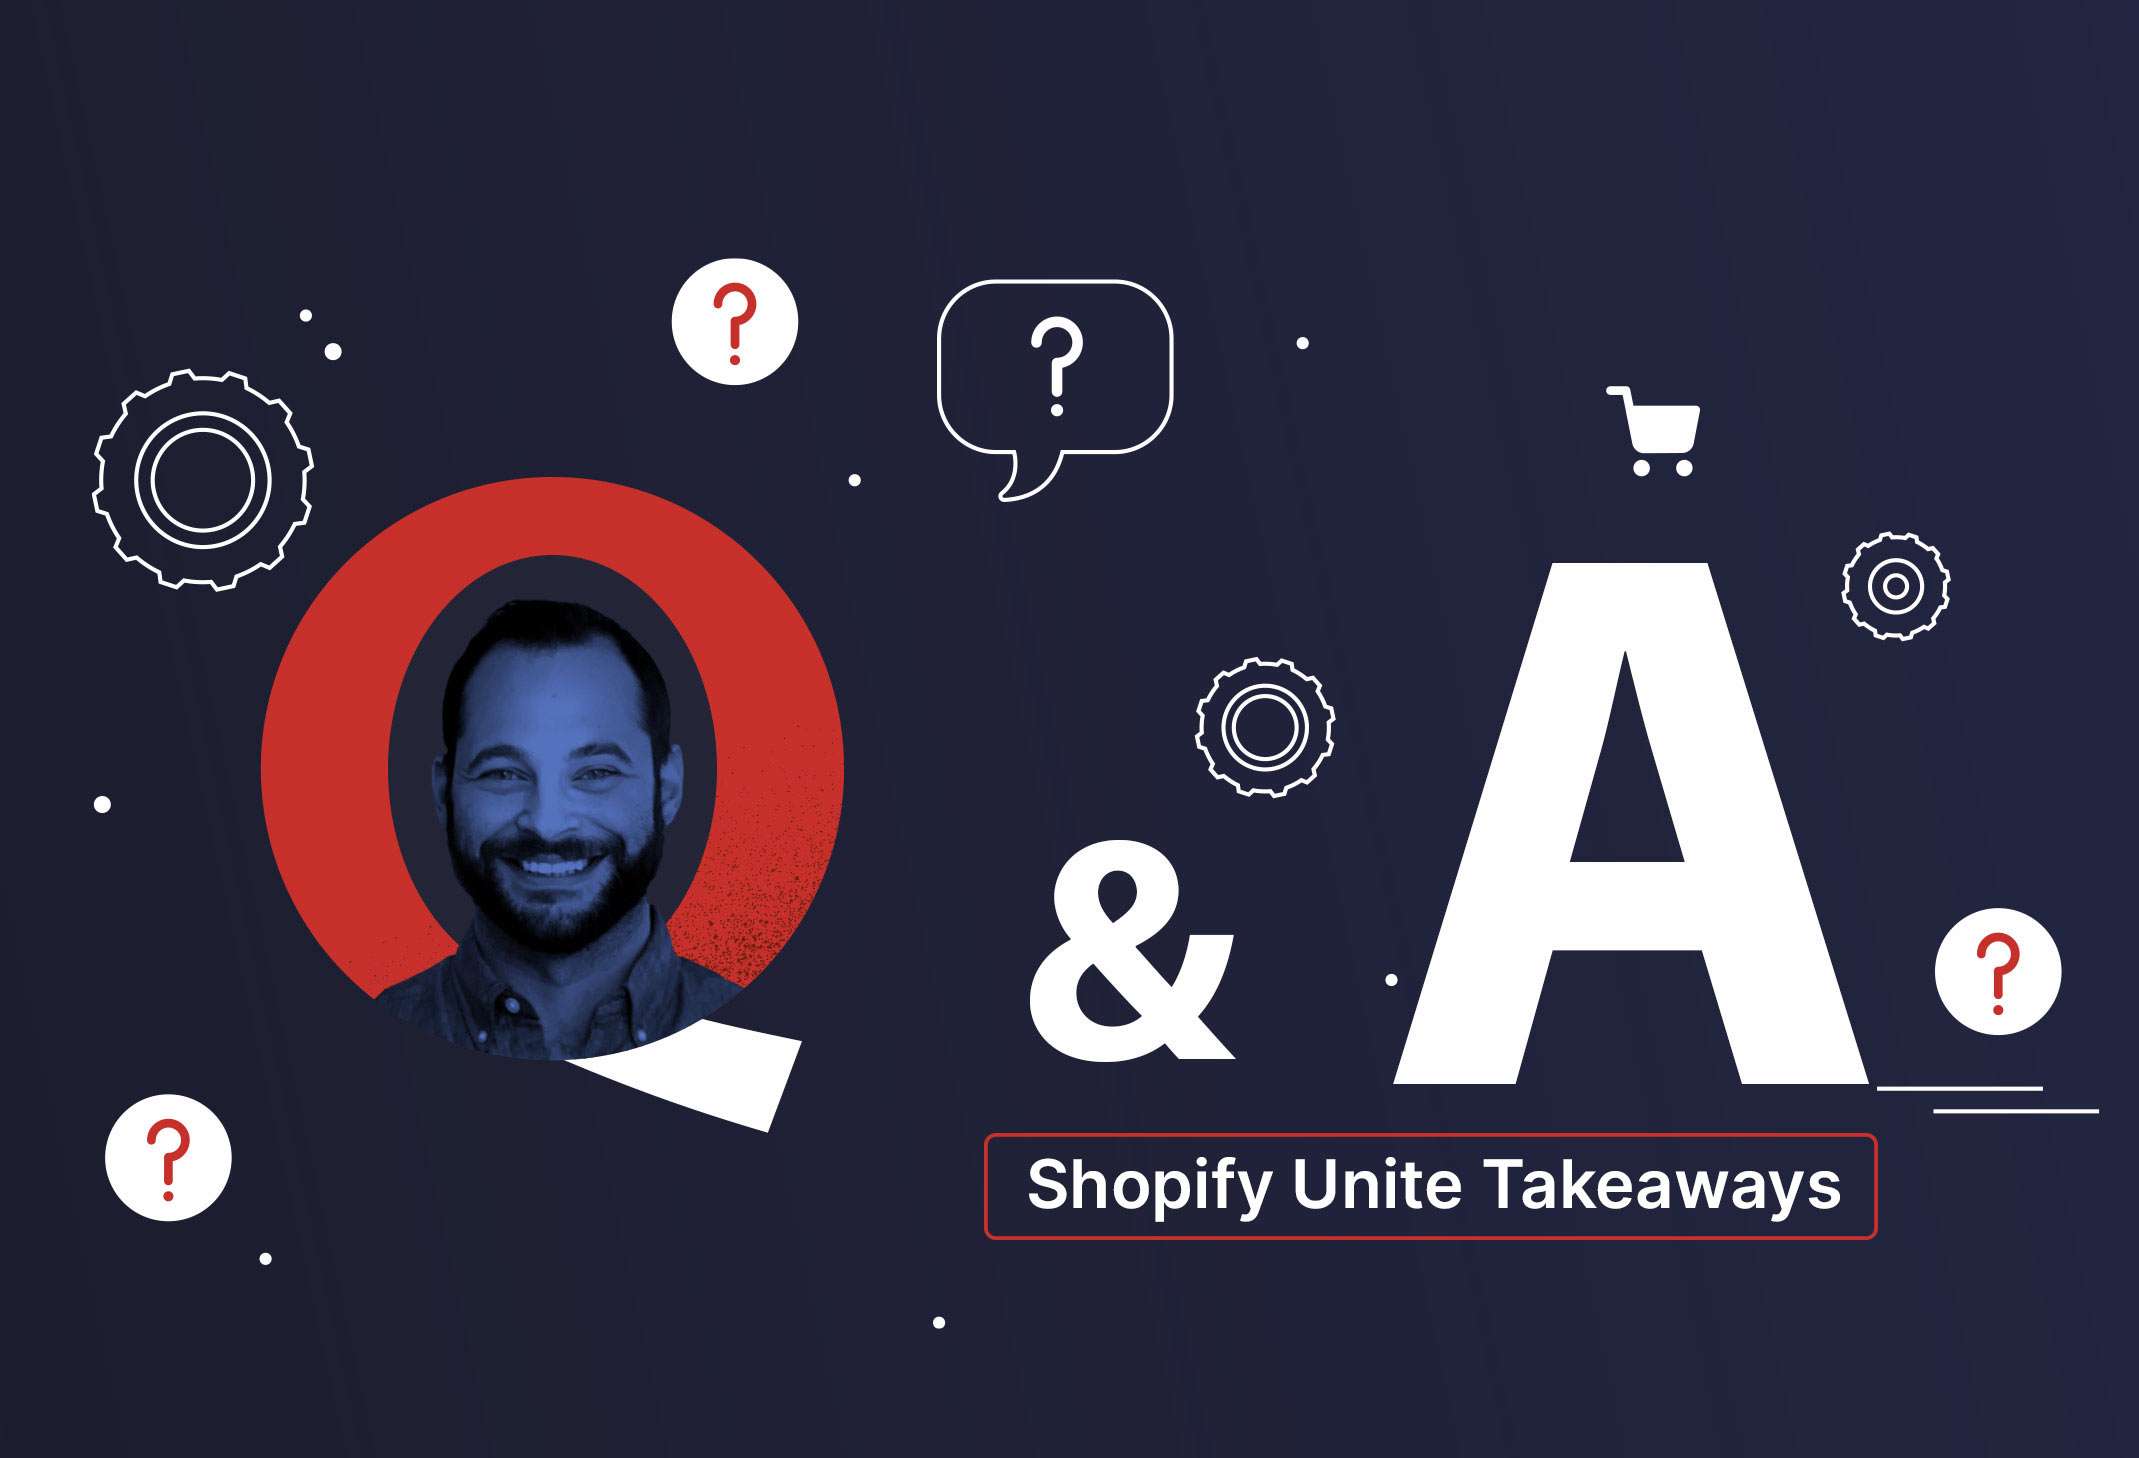  Top takeaways from Shopify Unite 2021 